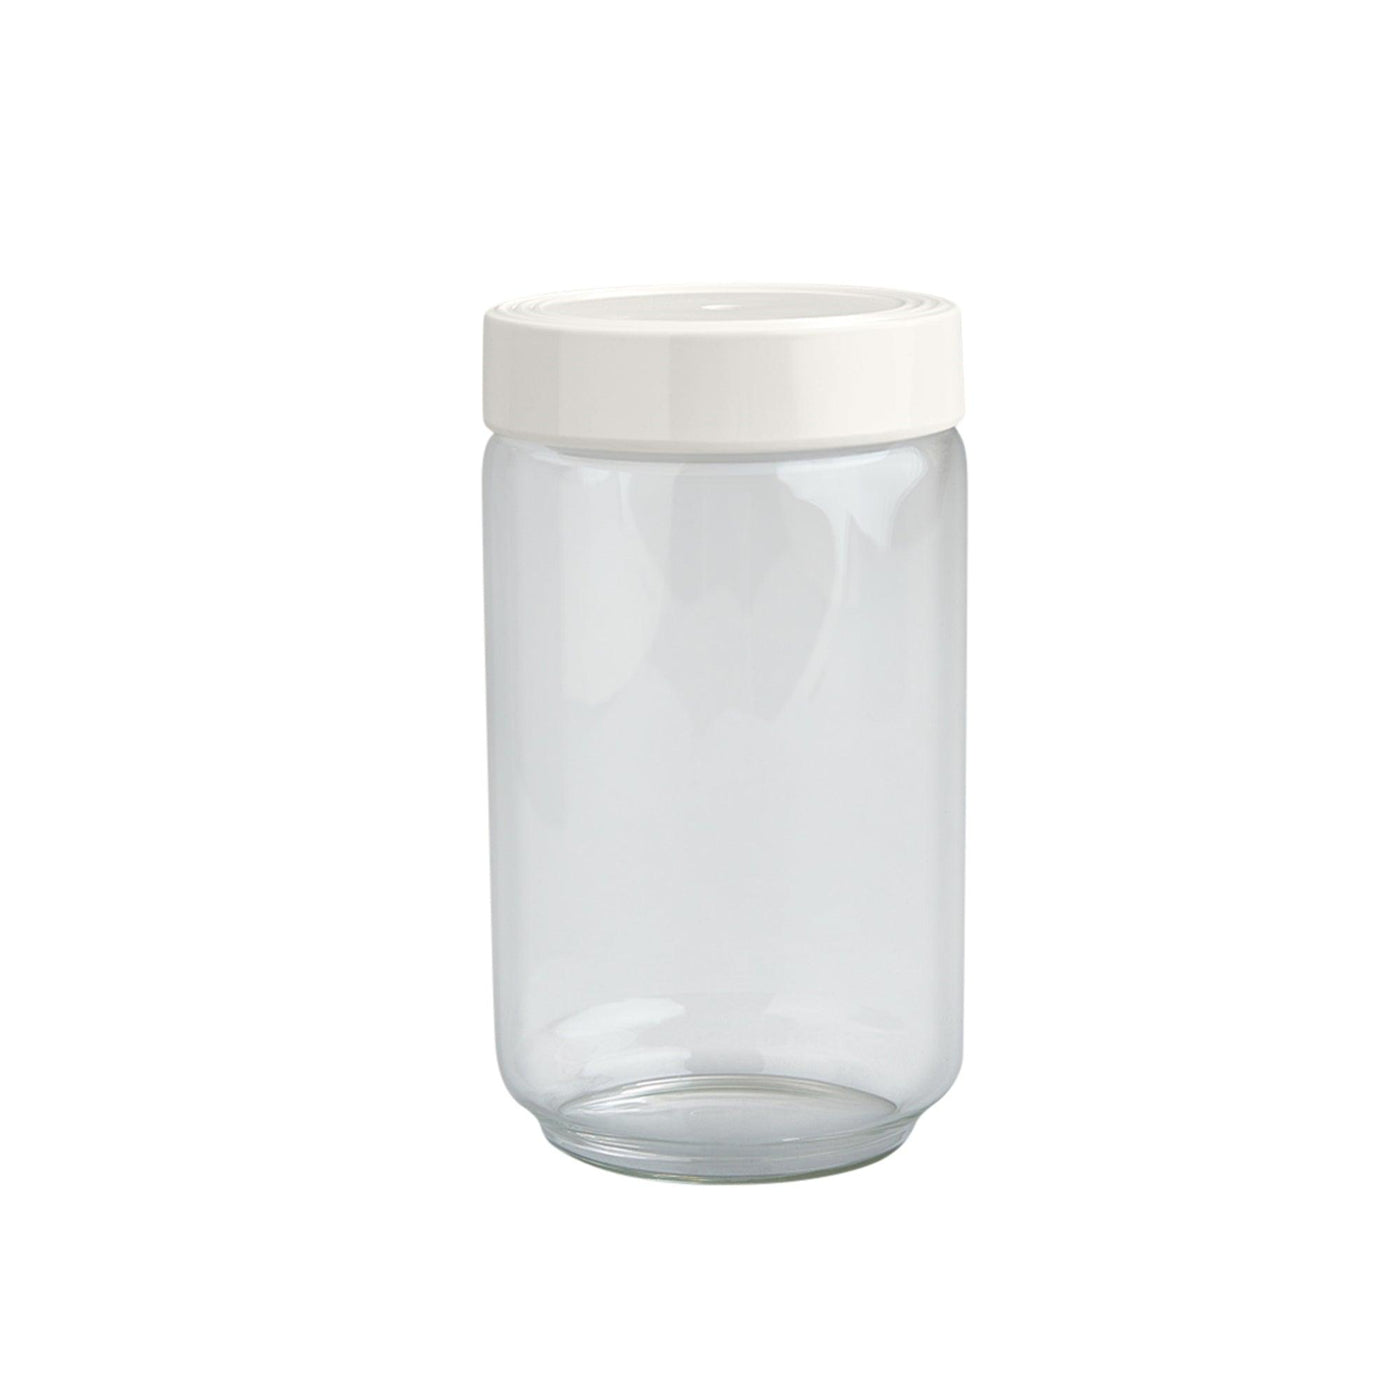 Large clear canister with white pinstripe lid